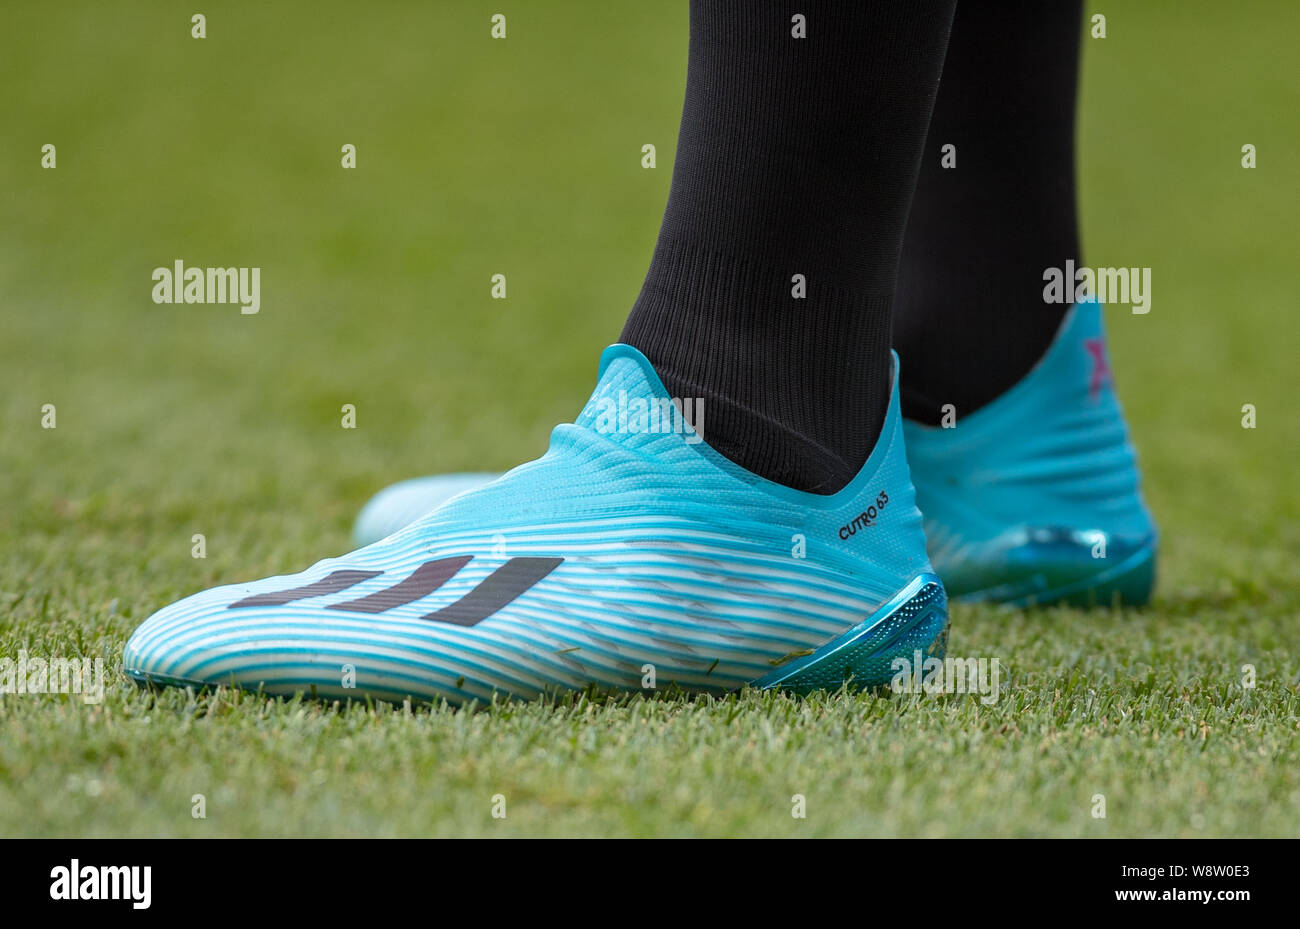 Page 3 - Adidas Football Boots High Resolution Stock Photography and Images  - Alamy